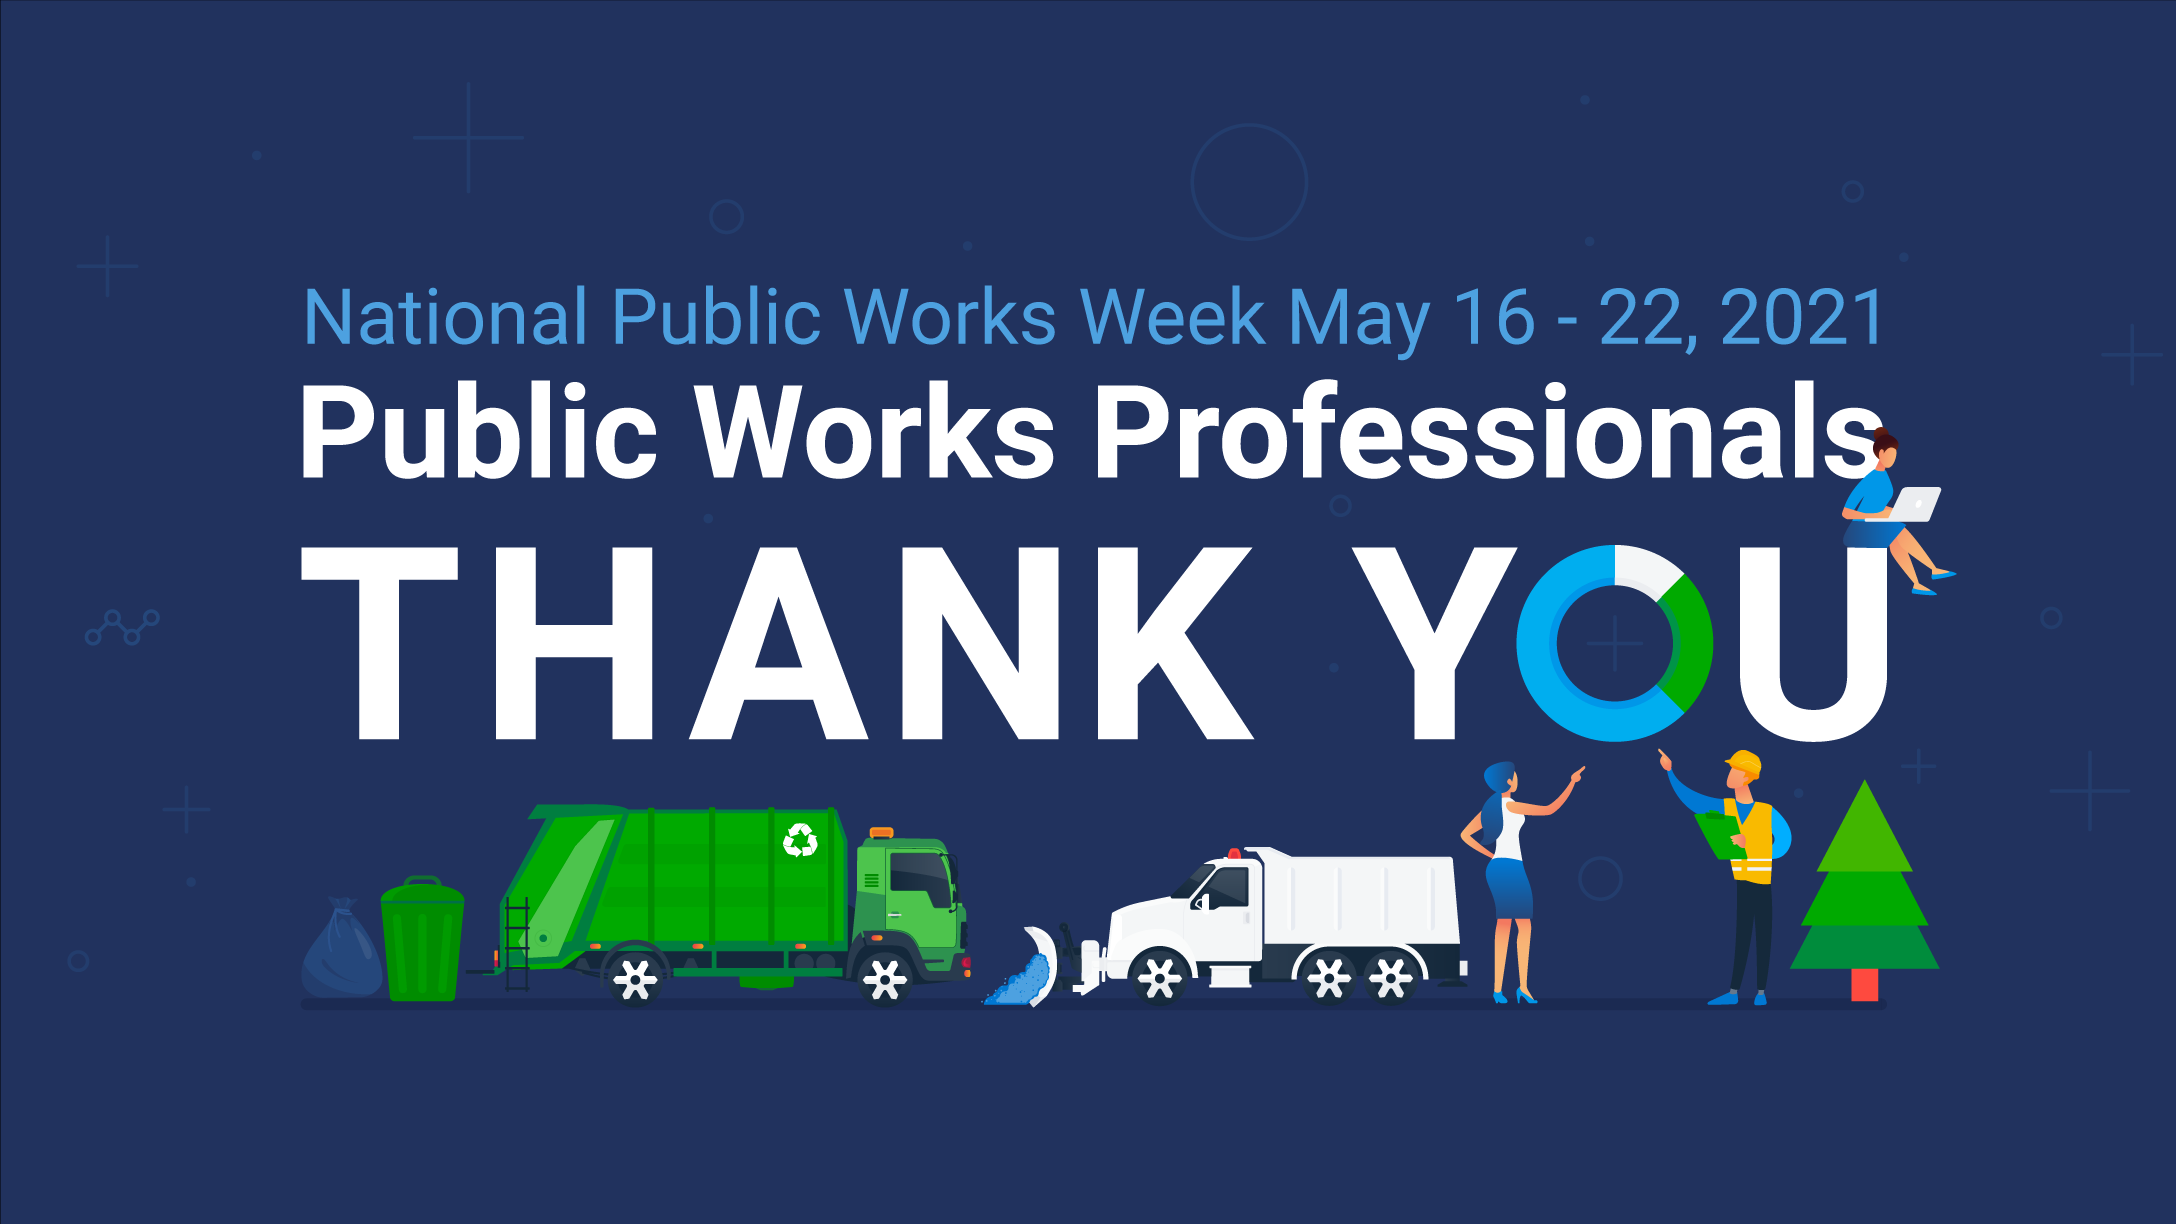 Public Works Professionals Week - Thank You Infographic